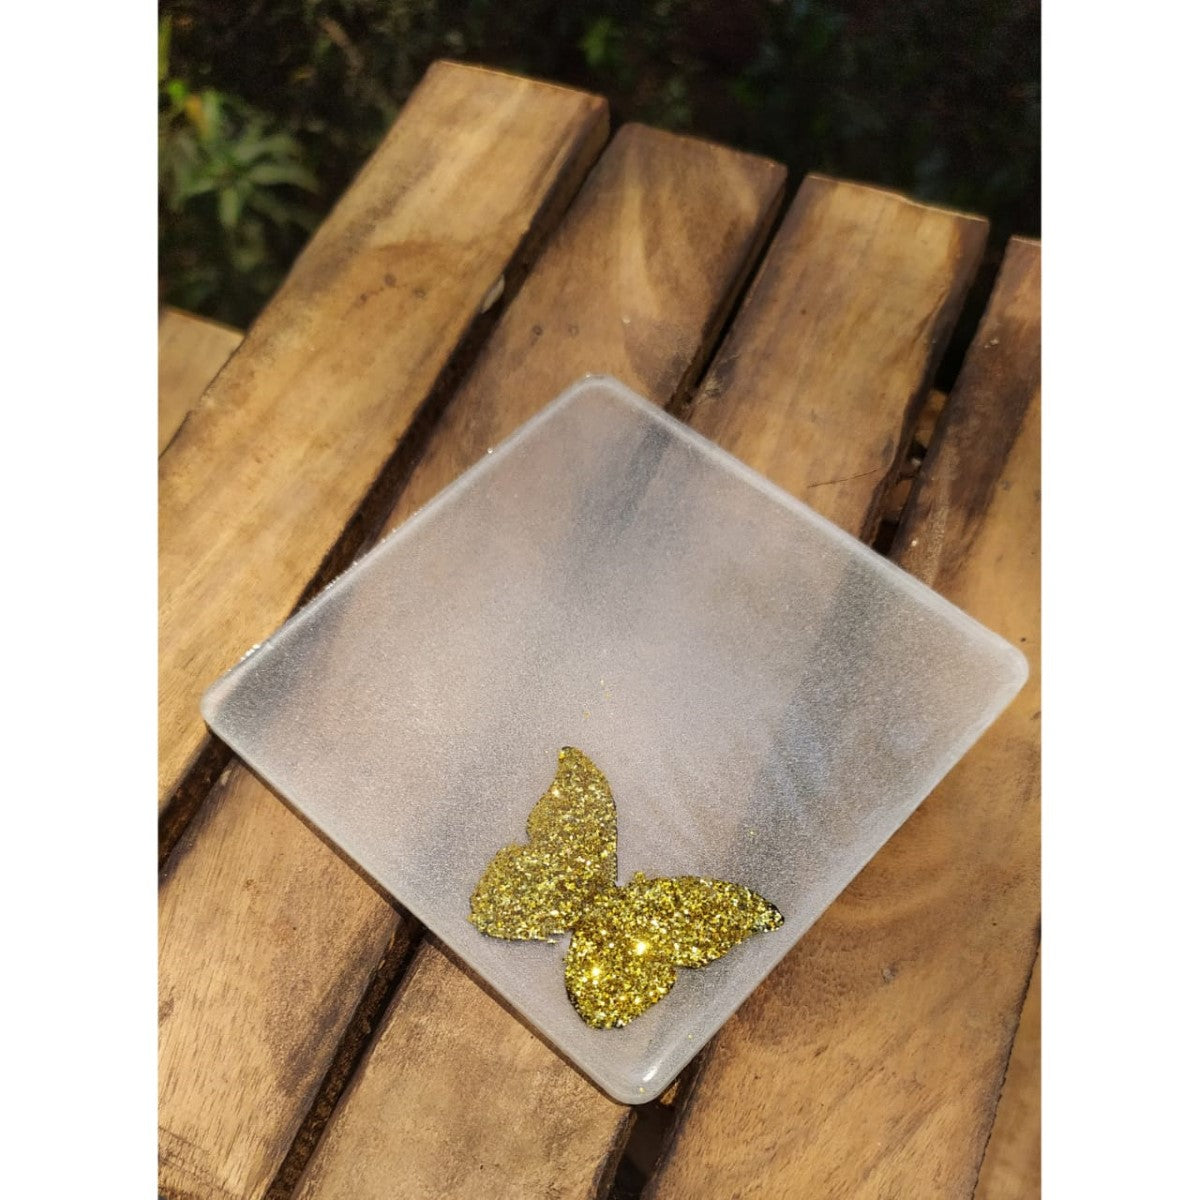 Social Butterfly Resin Coaster (Set of 2)